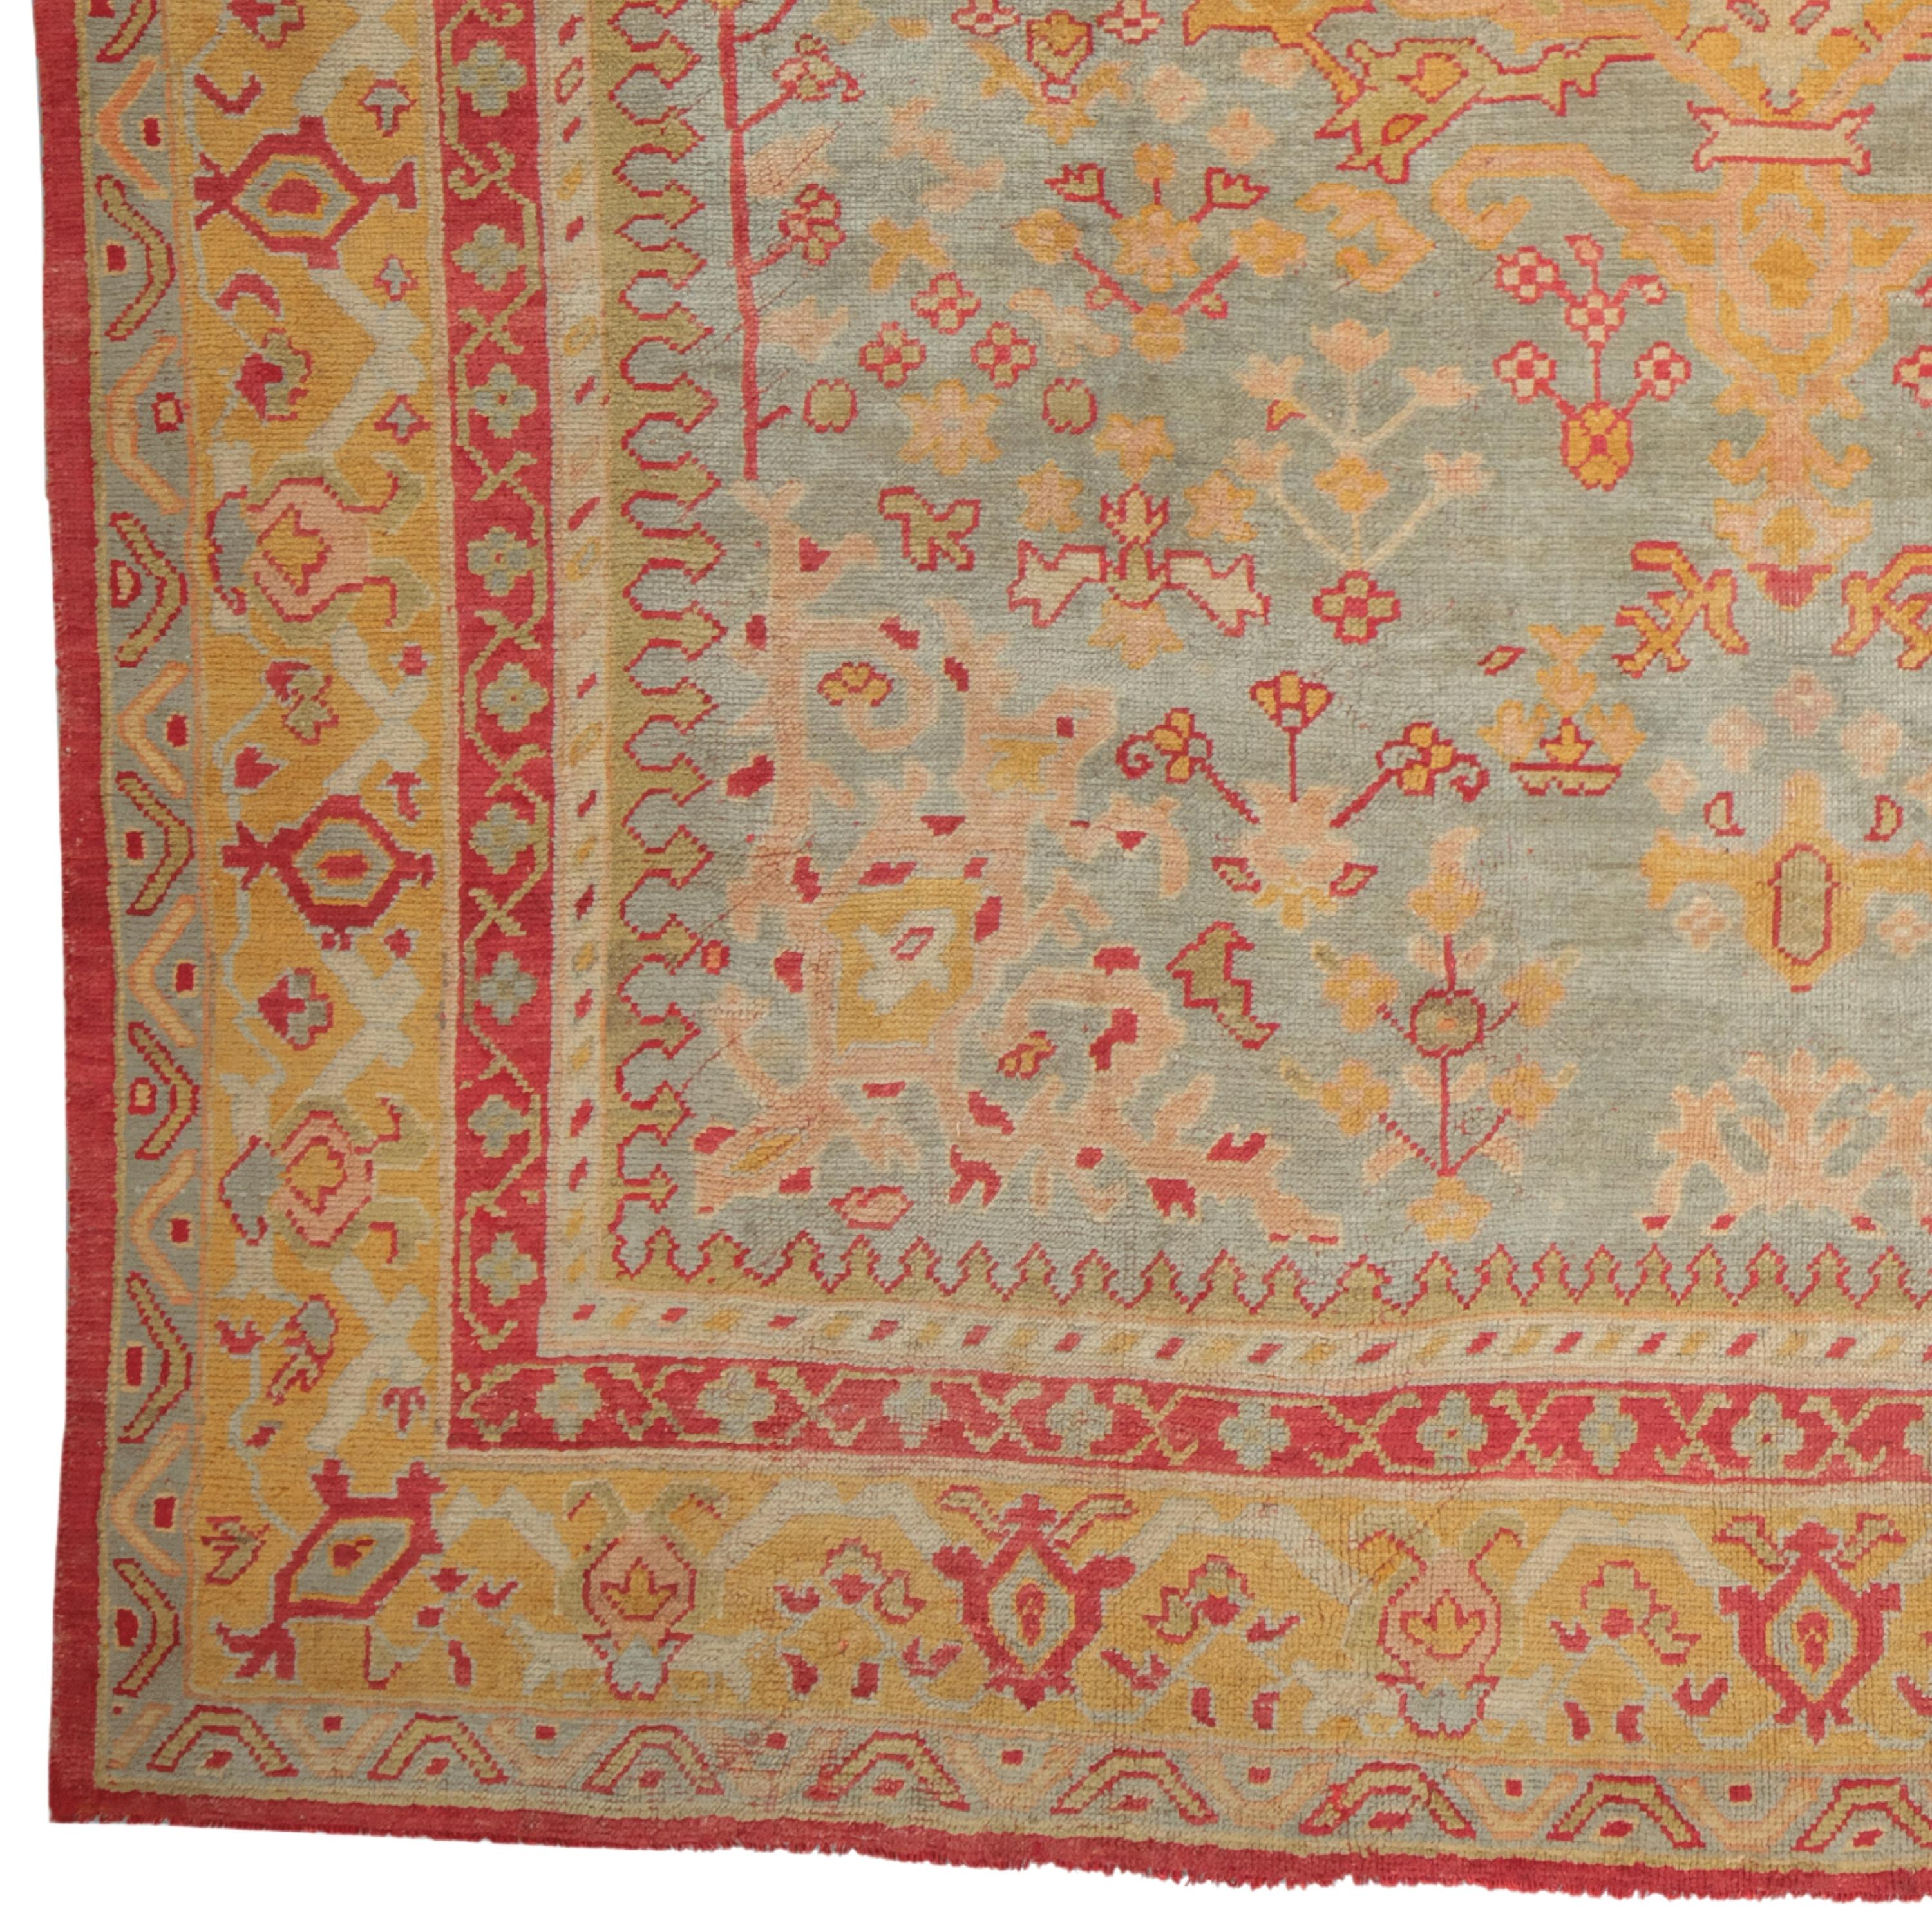 A Historical Beauty: Antique Ushak Carpet from the End of the 19th Century

If you want to add historical and artistic value to your home, this antique carpet is for you. This carpet is an Ushak carpet woven in the Ushak region at the end of the